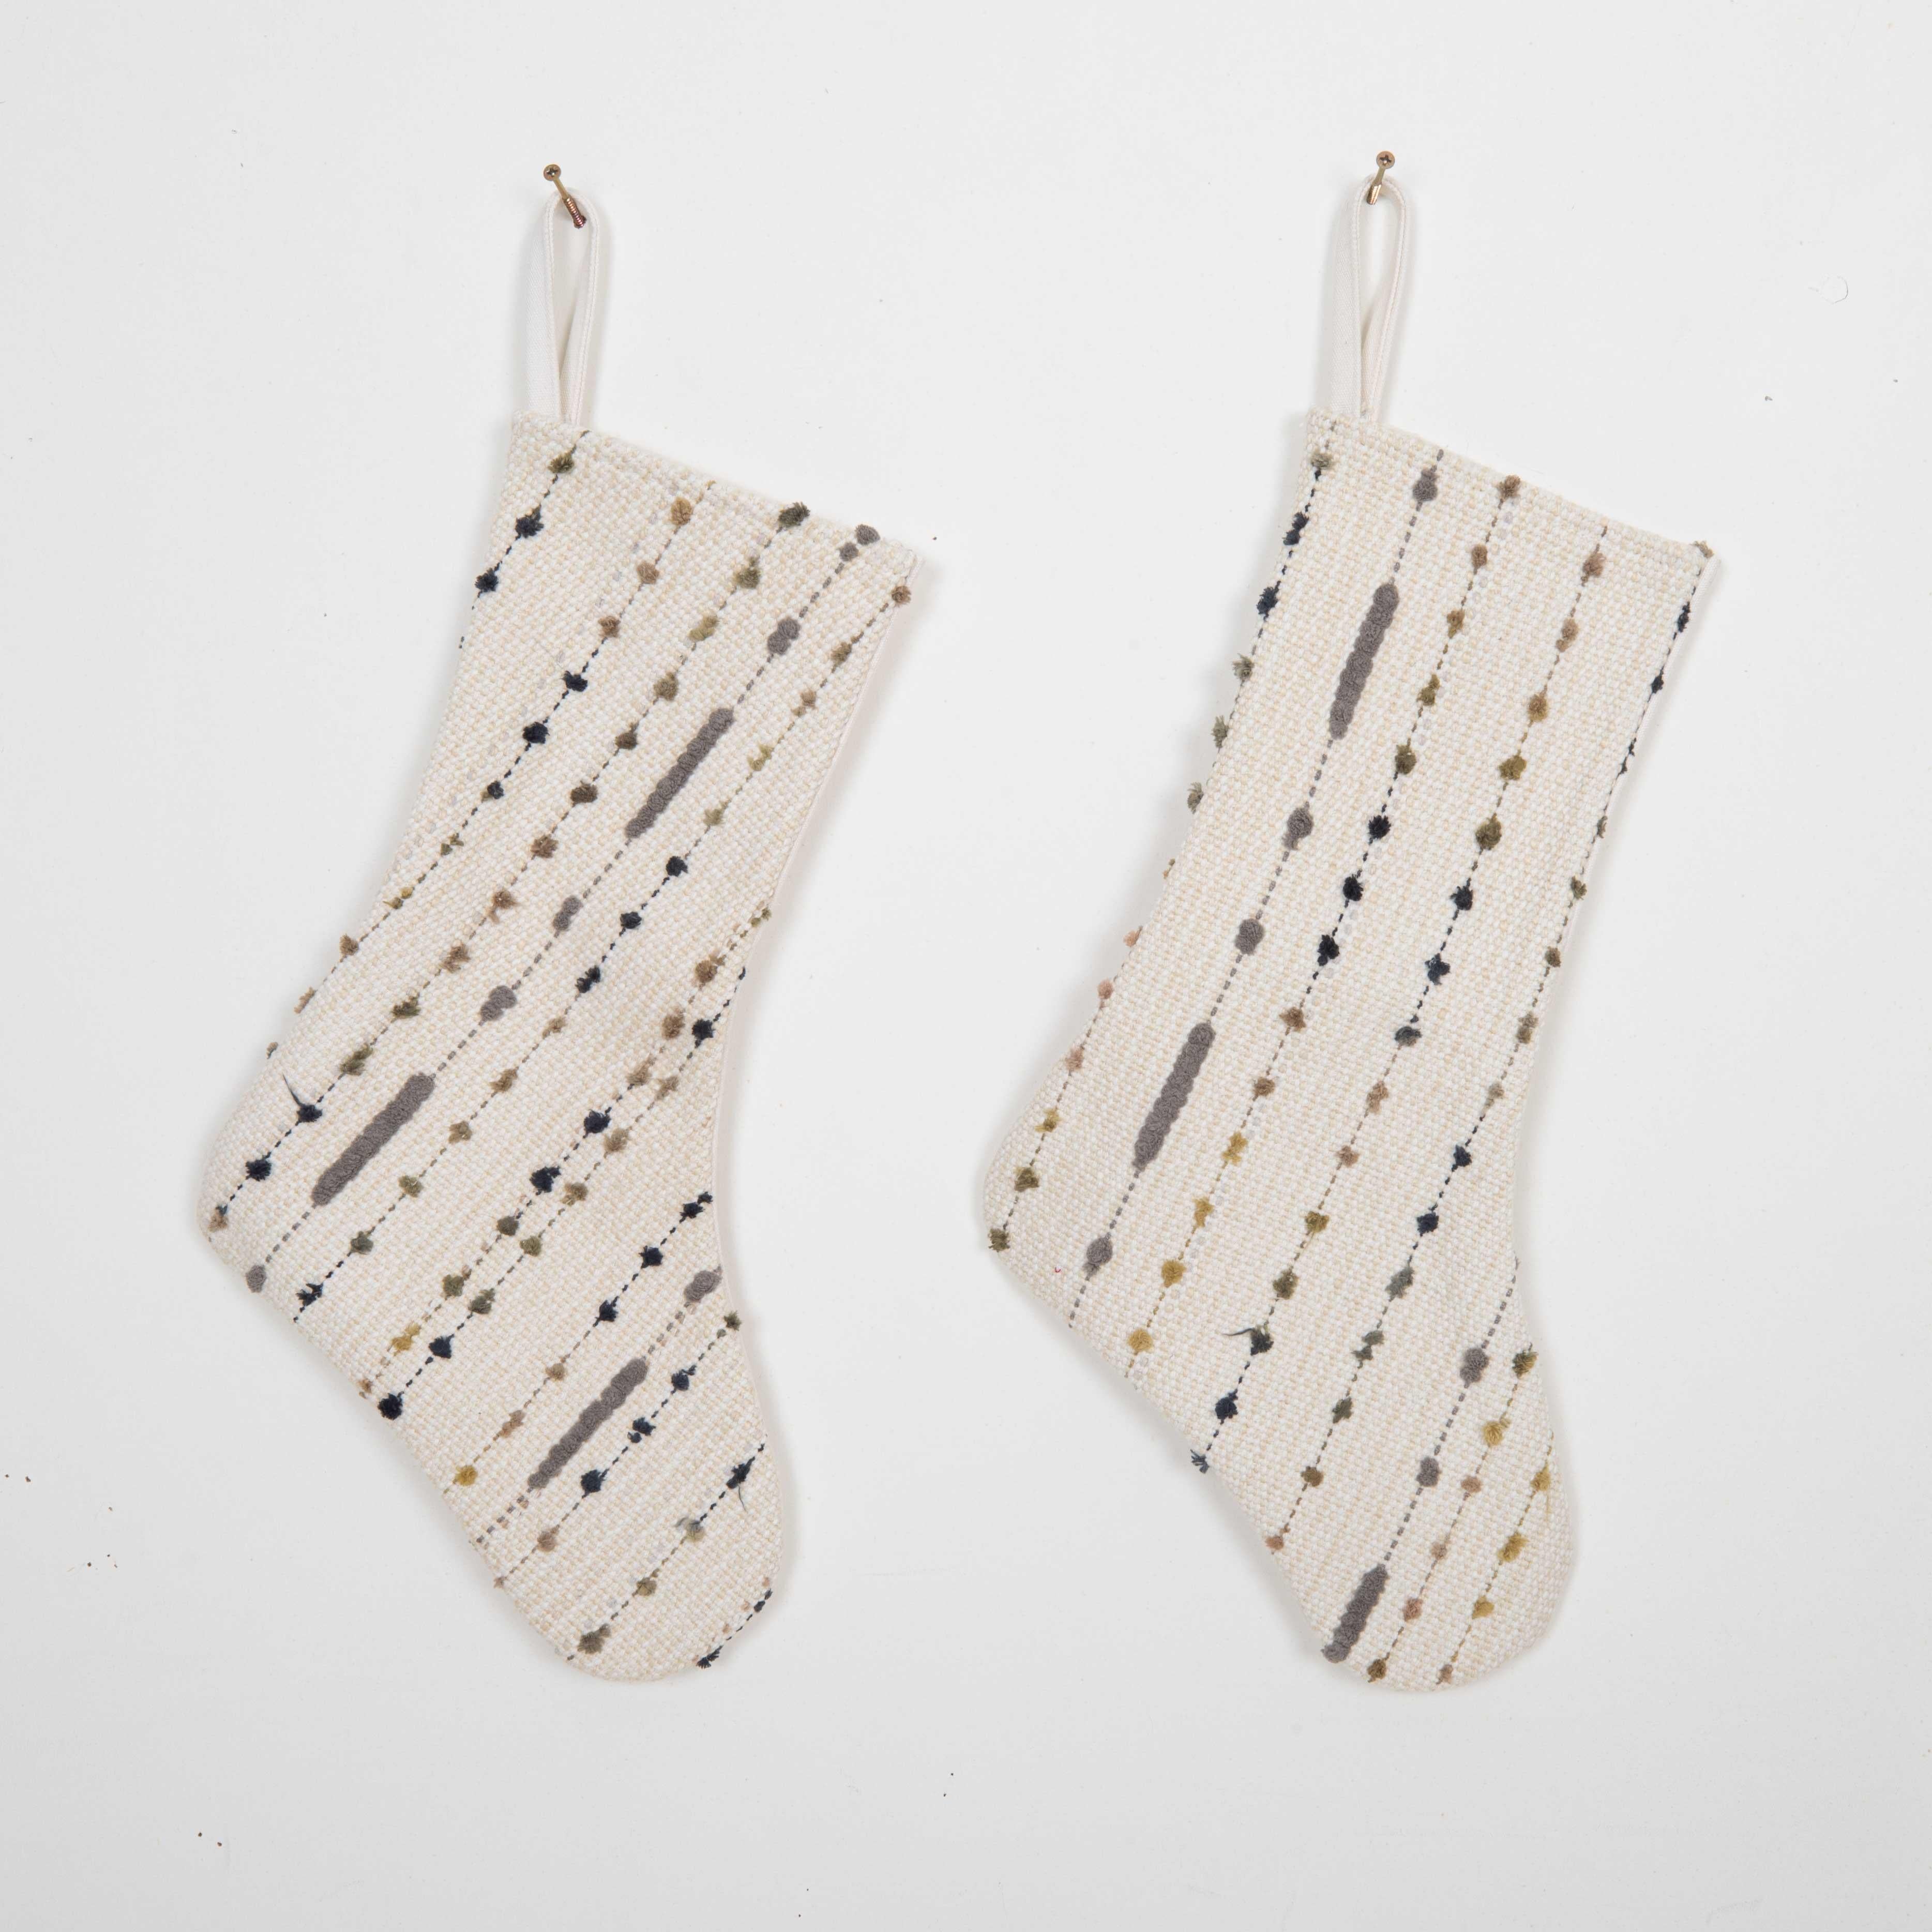 These Christmas Stockings were made from Contemporary, Anatolian Kilim Fragments.


Please note, this stocking was made from kilim fragments
